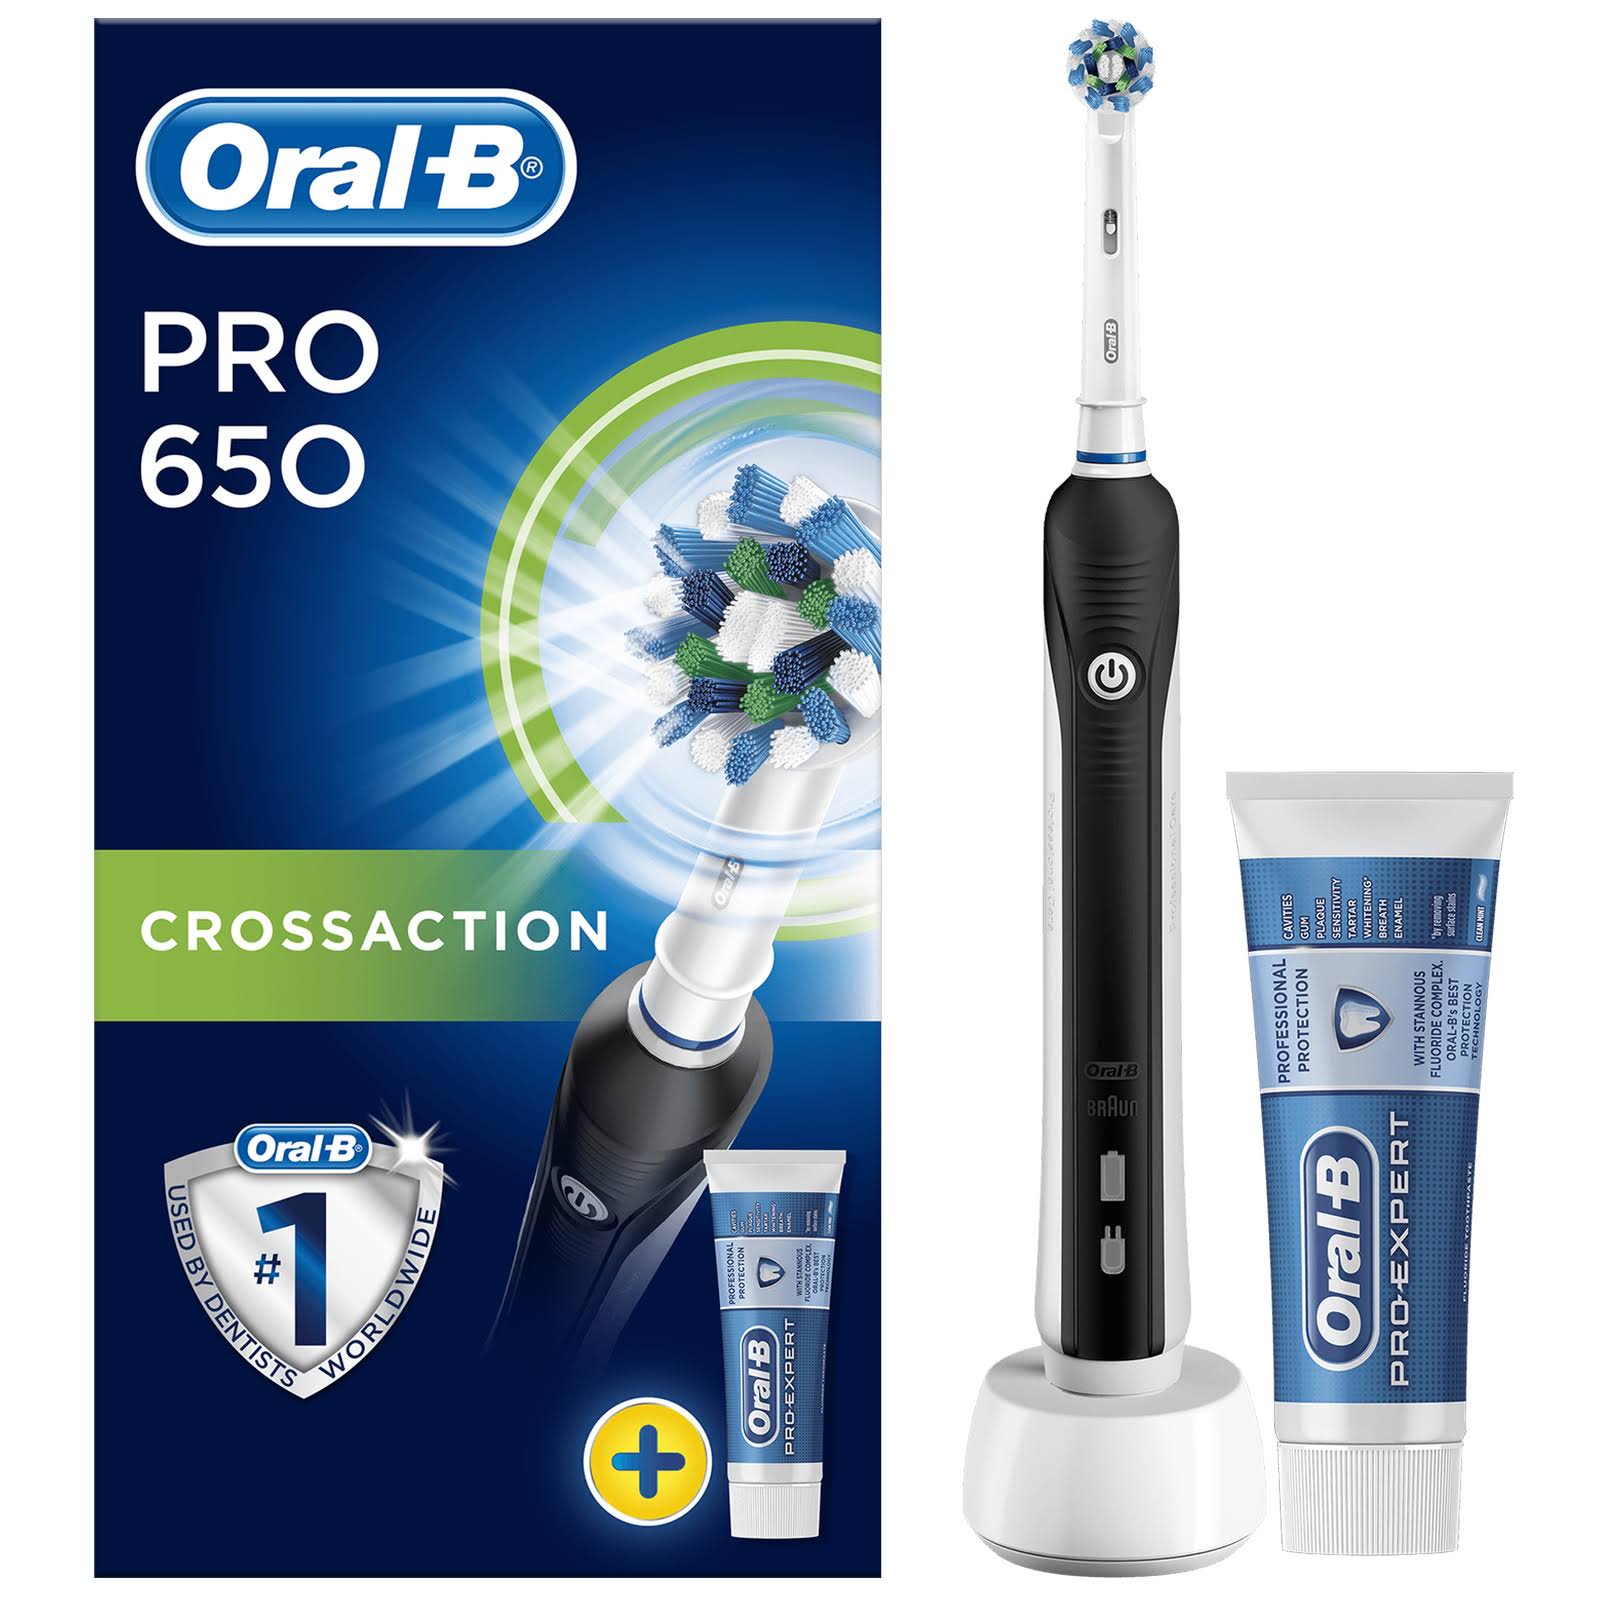 Oral-B Pro 650 3D Crossaction Electric Toothbrush - with Toothpaste